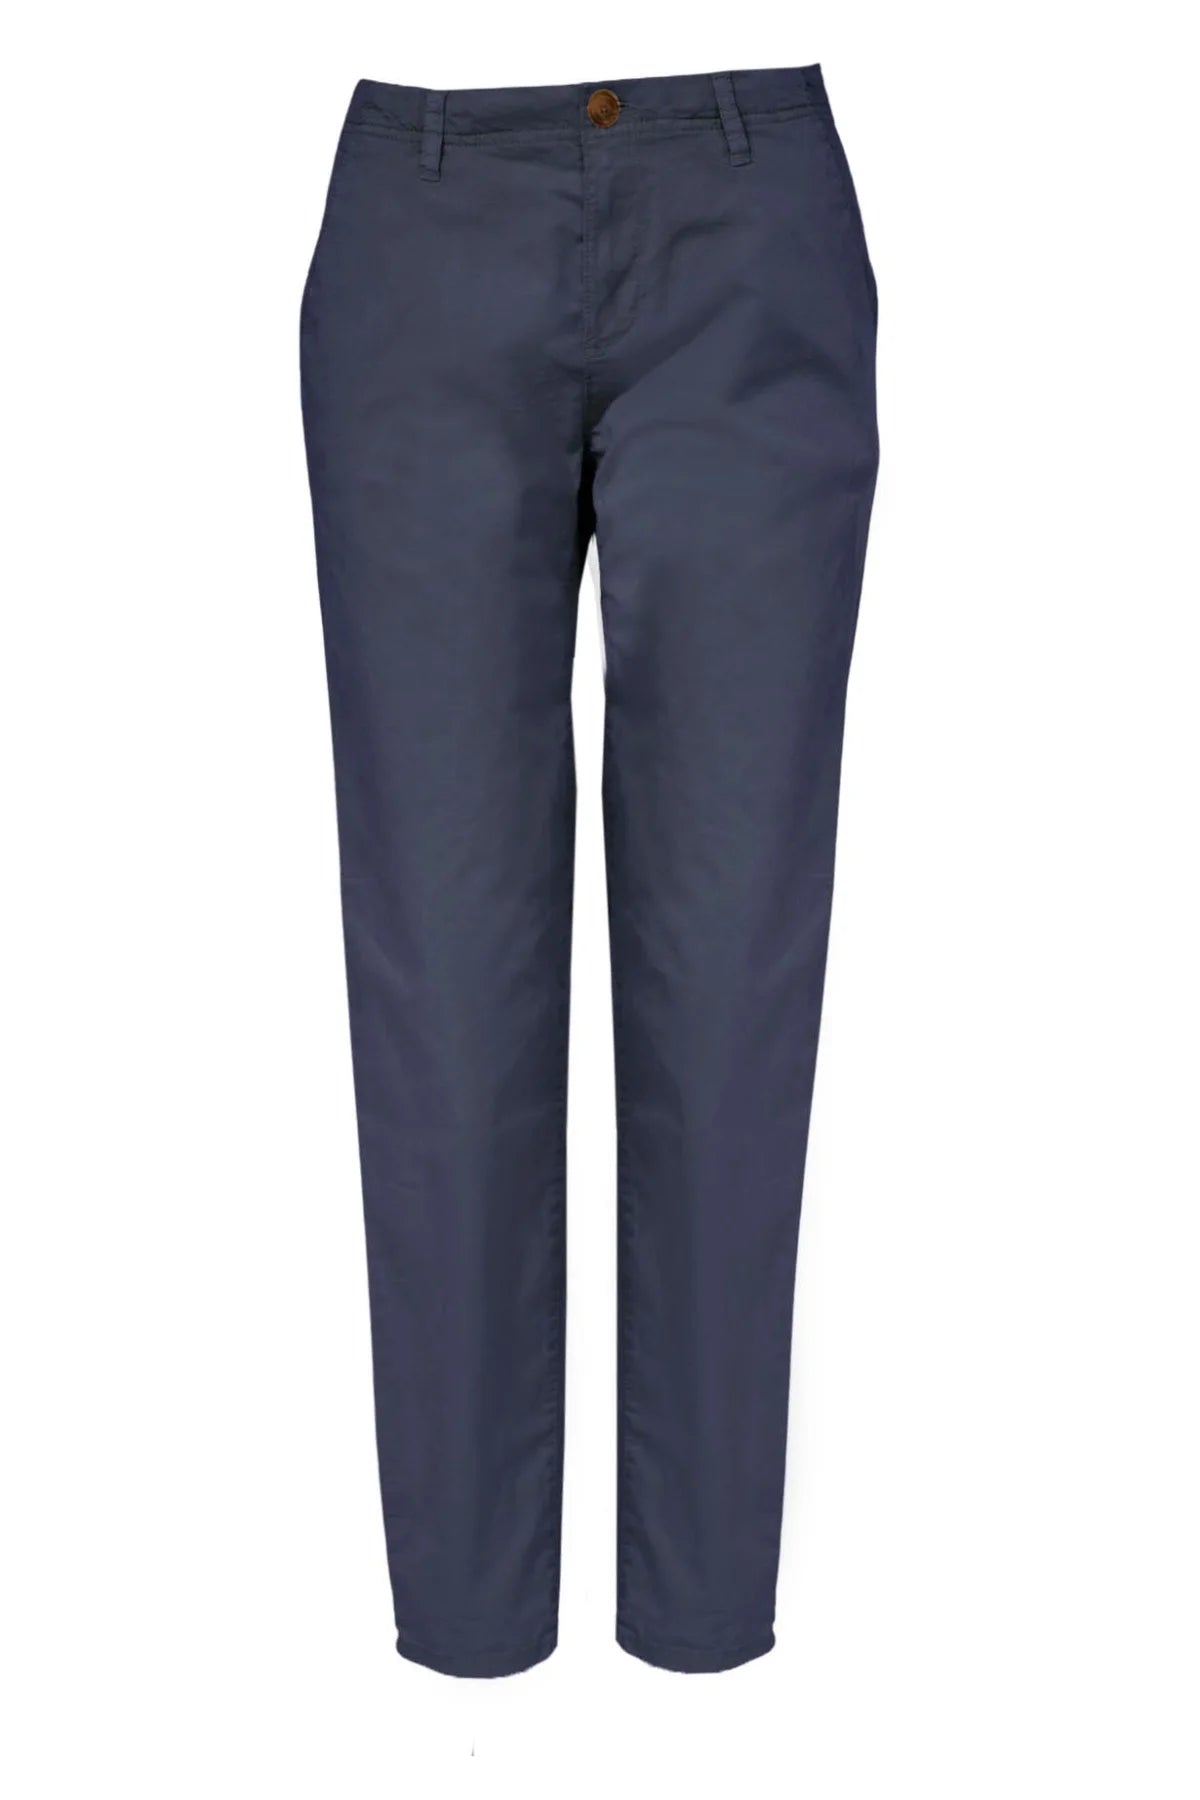 Esprit Stretch Cotton Chino Trousers Navy / 16 / Long